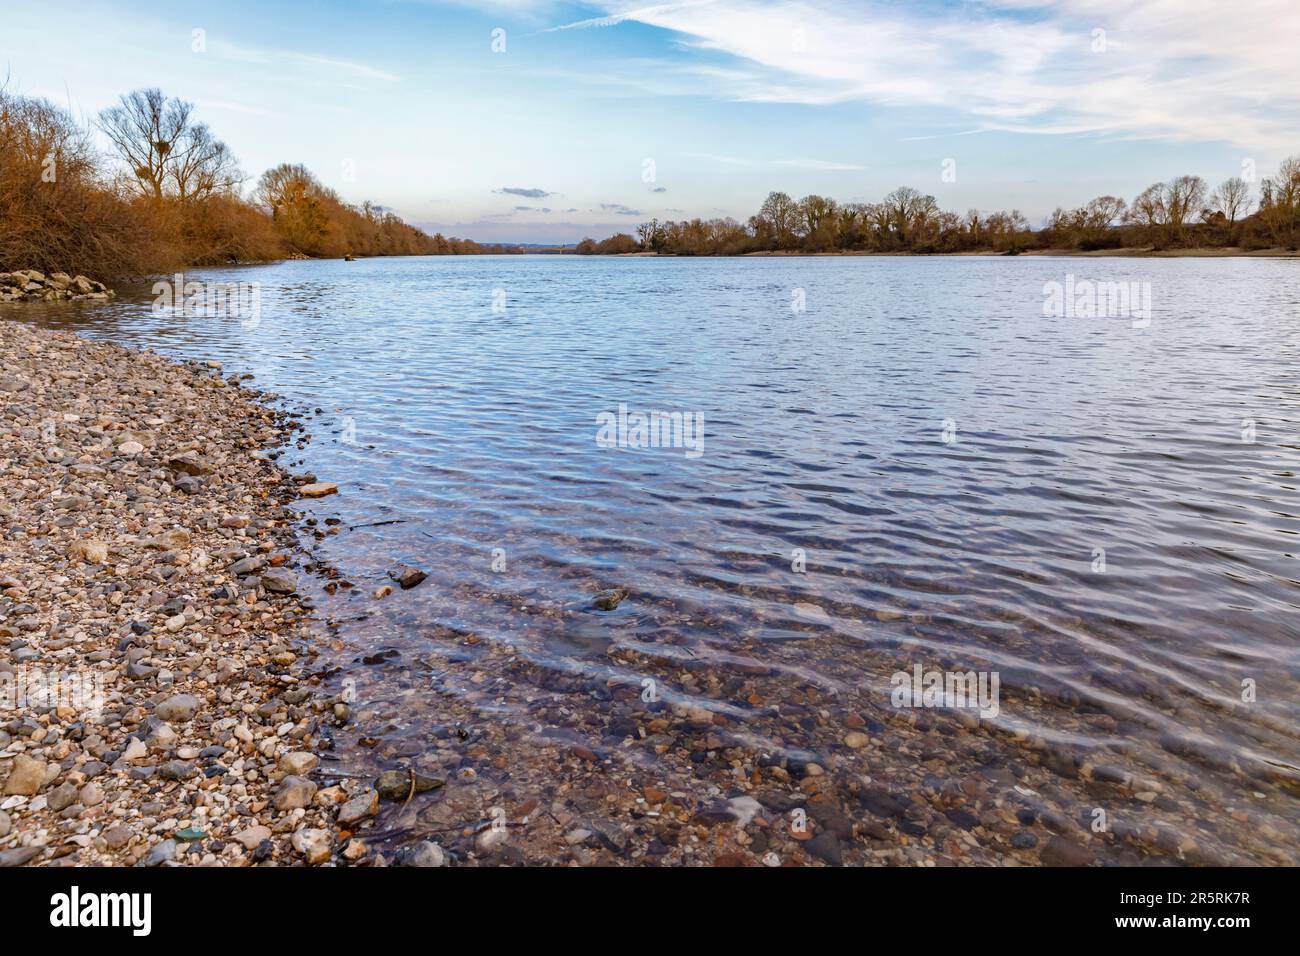 France, Seine-Maritime, Freneuse, near Elbeuf-sur-Seine, Chevalier Island, wild bank of the Seine, close up of transparent river water, alluvial sand and gravel Stock Photo